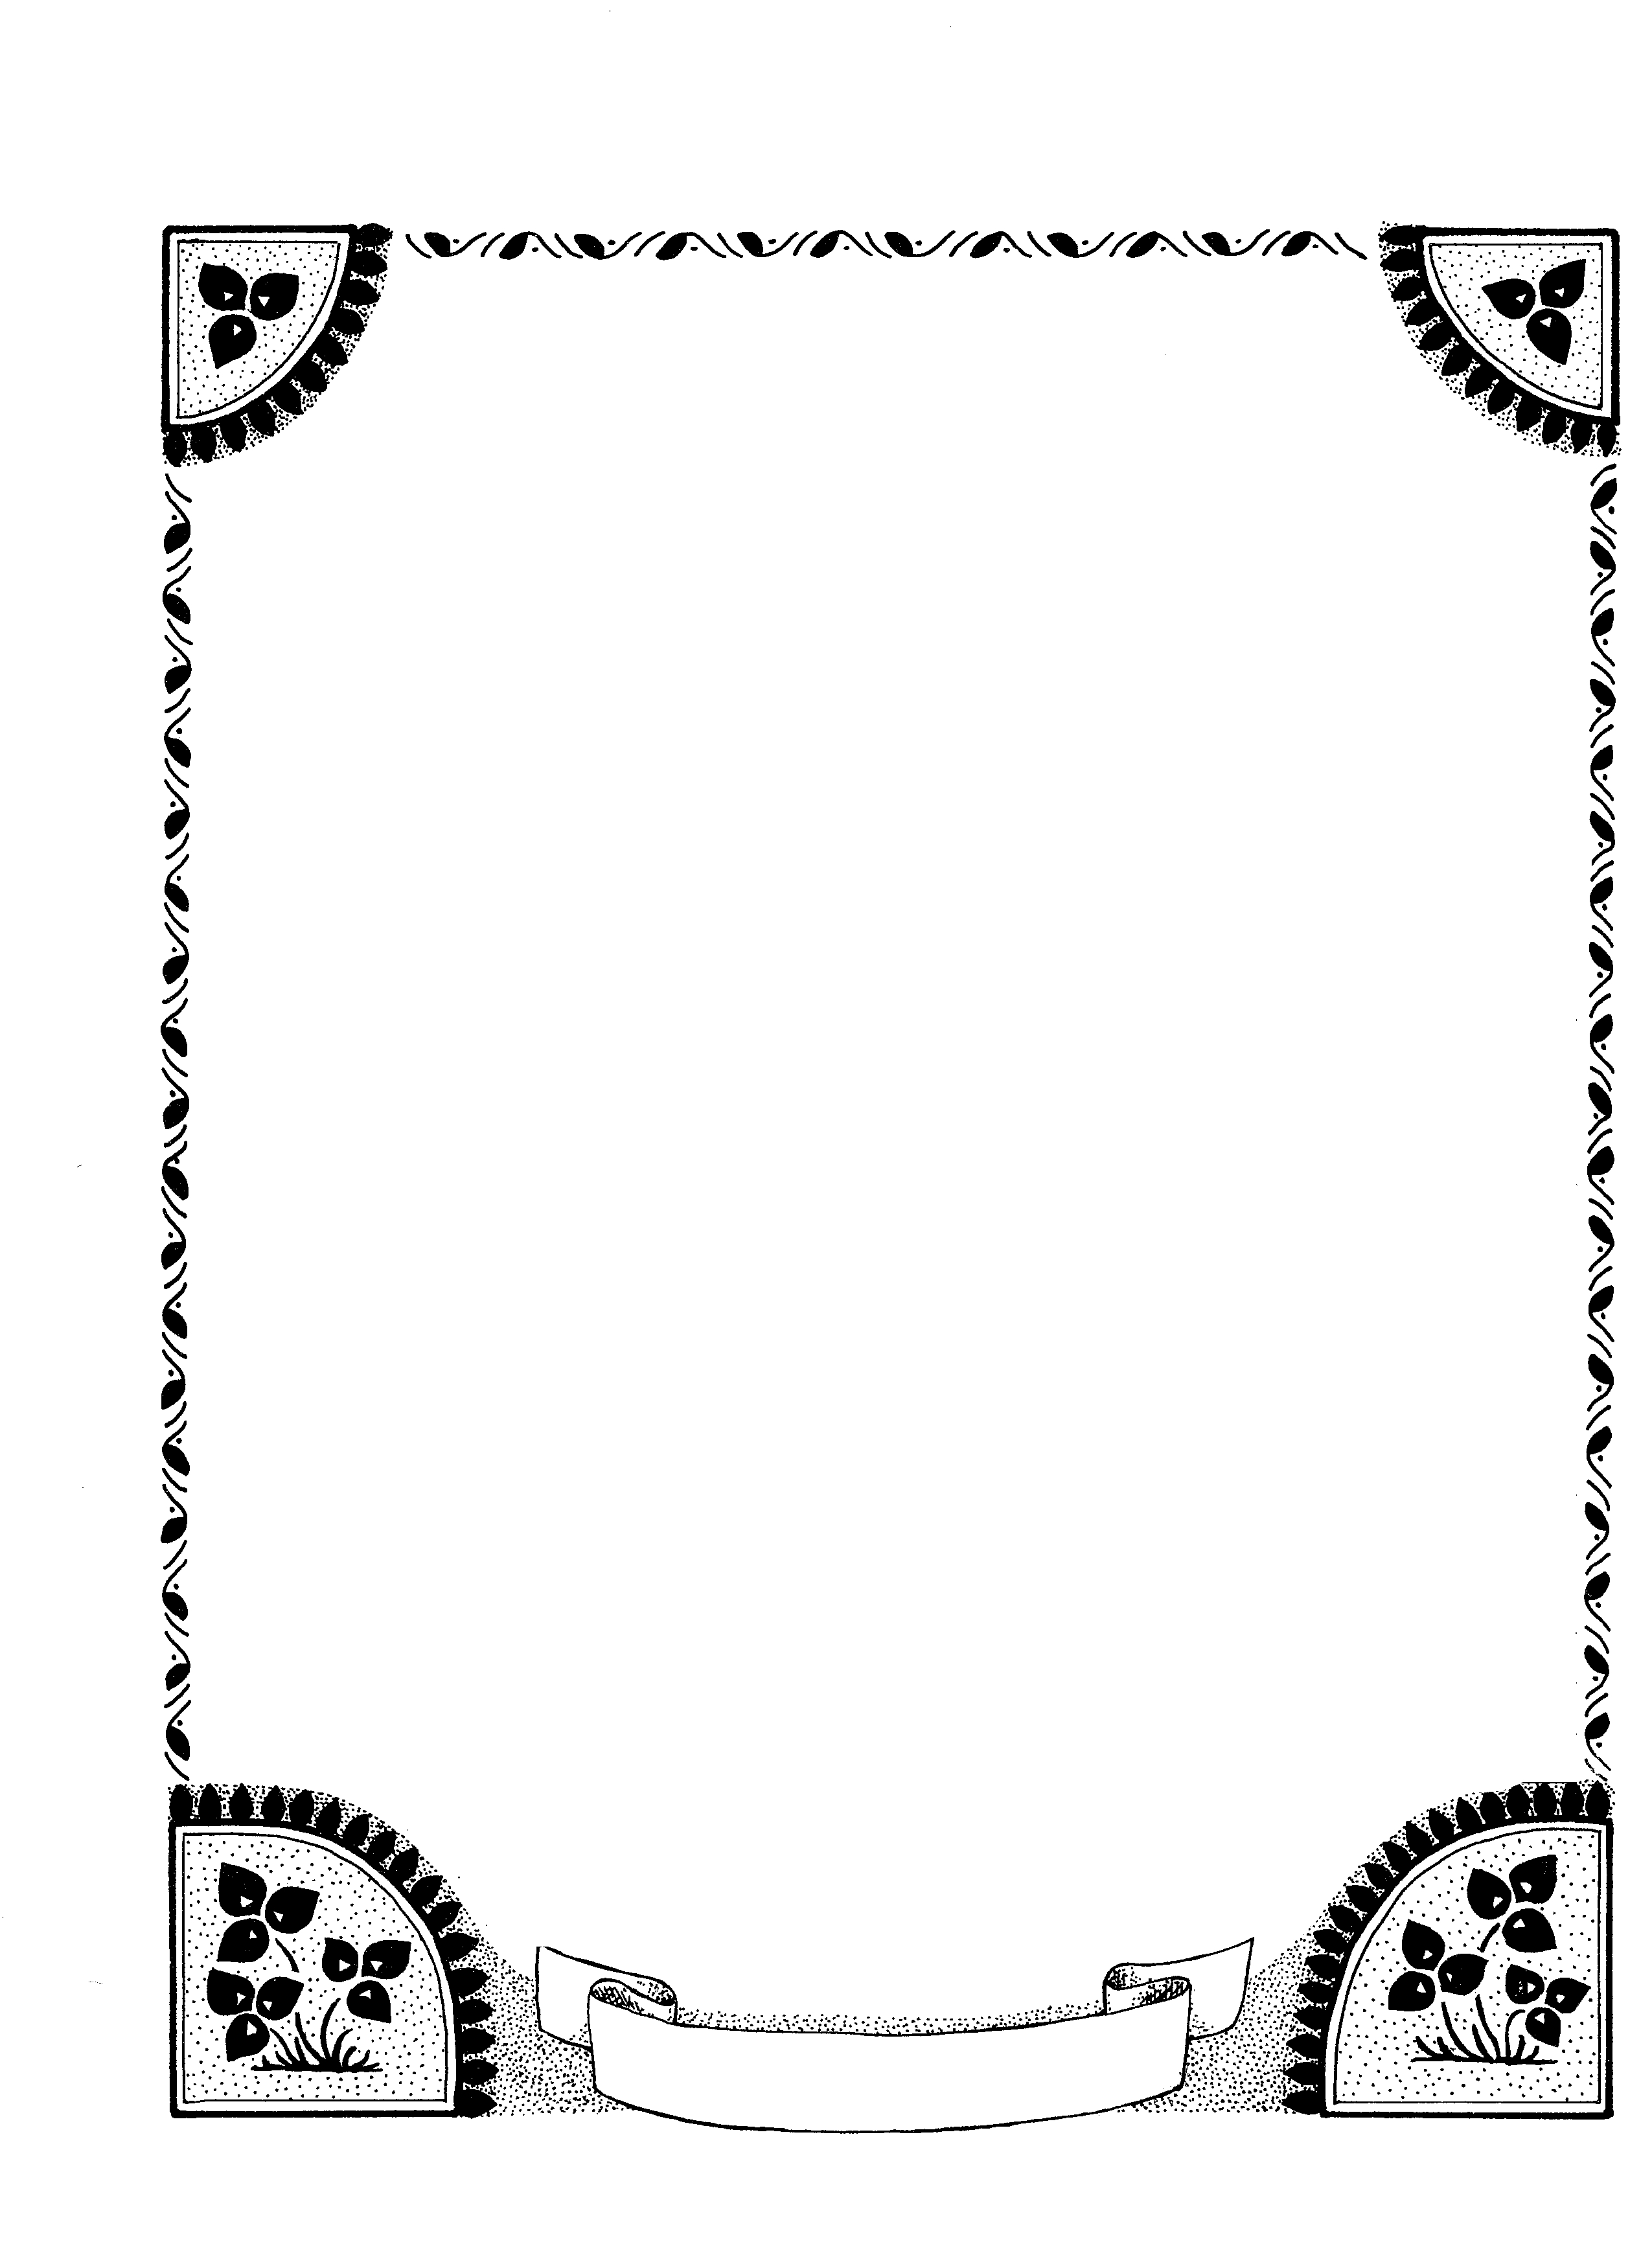 black and white page borders free